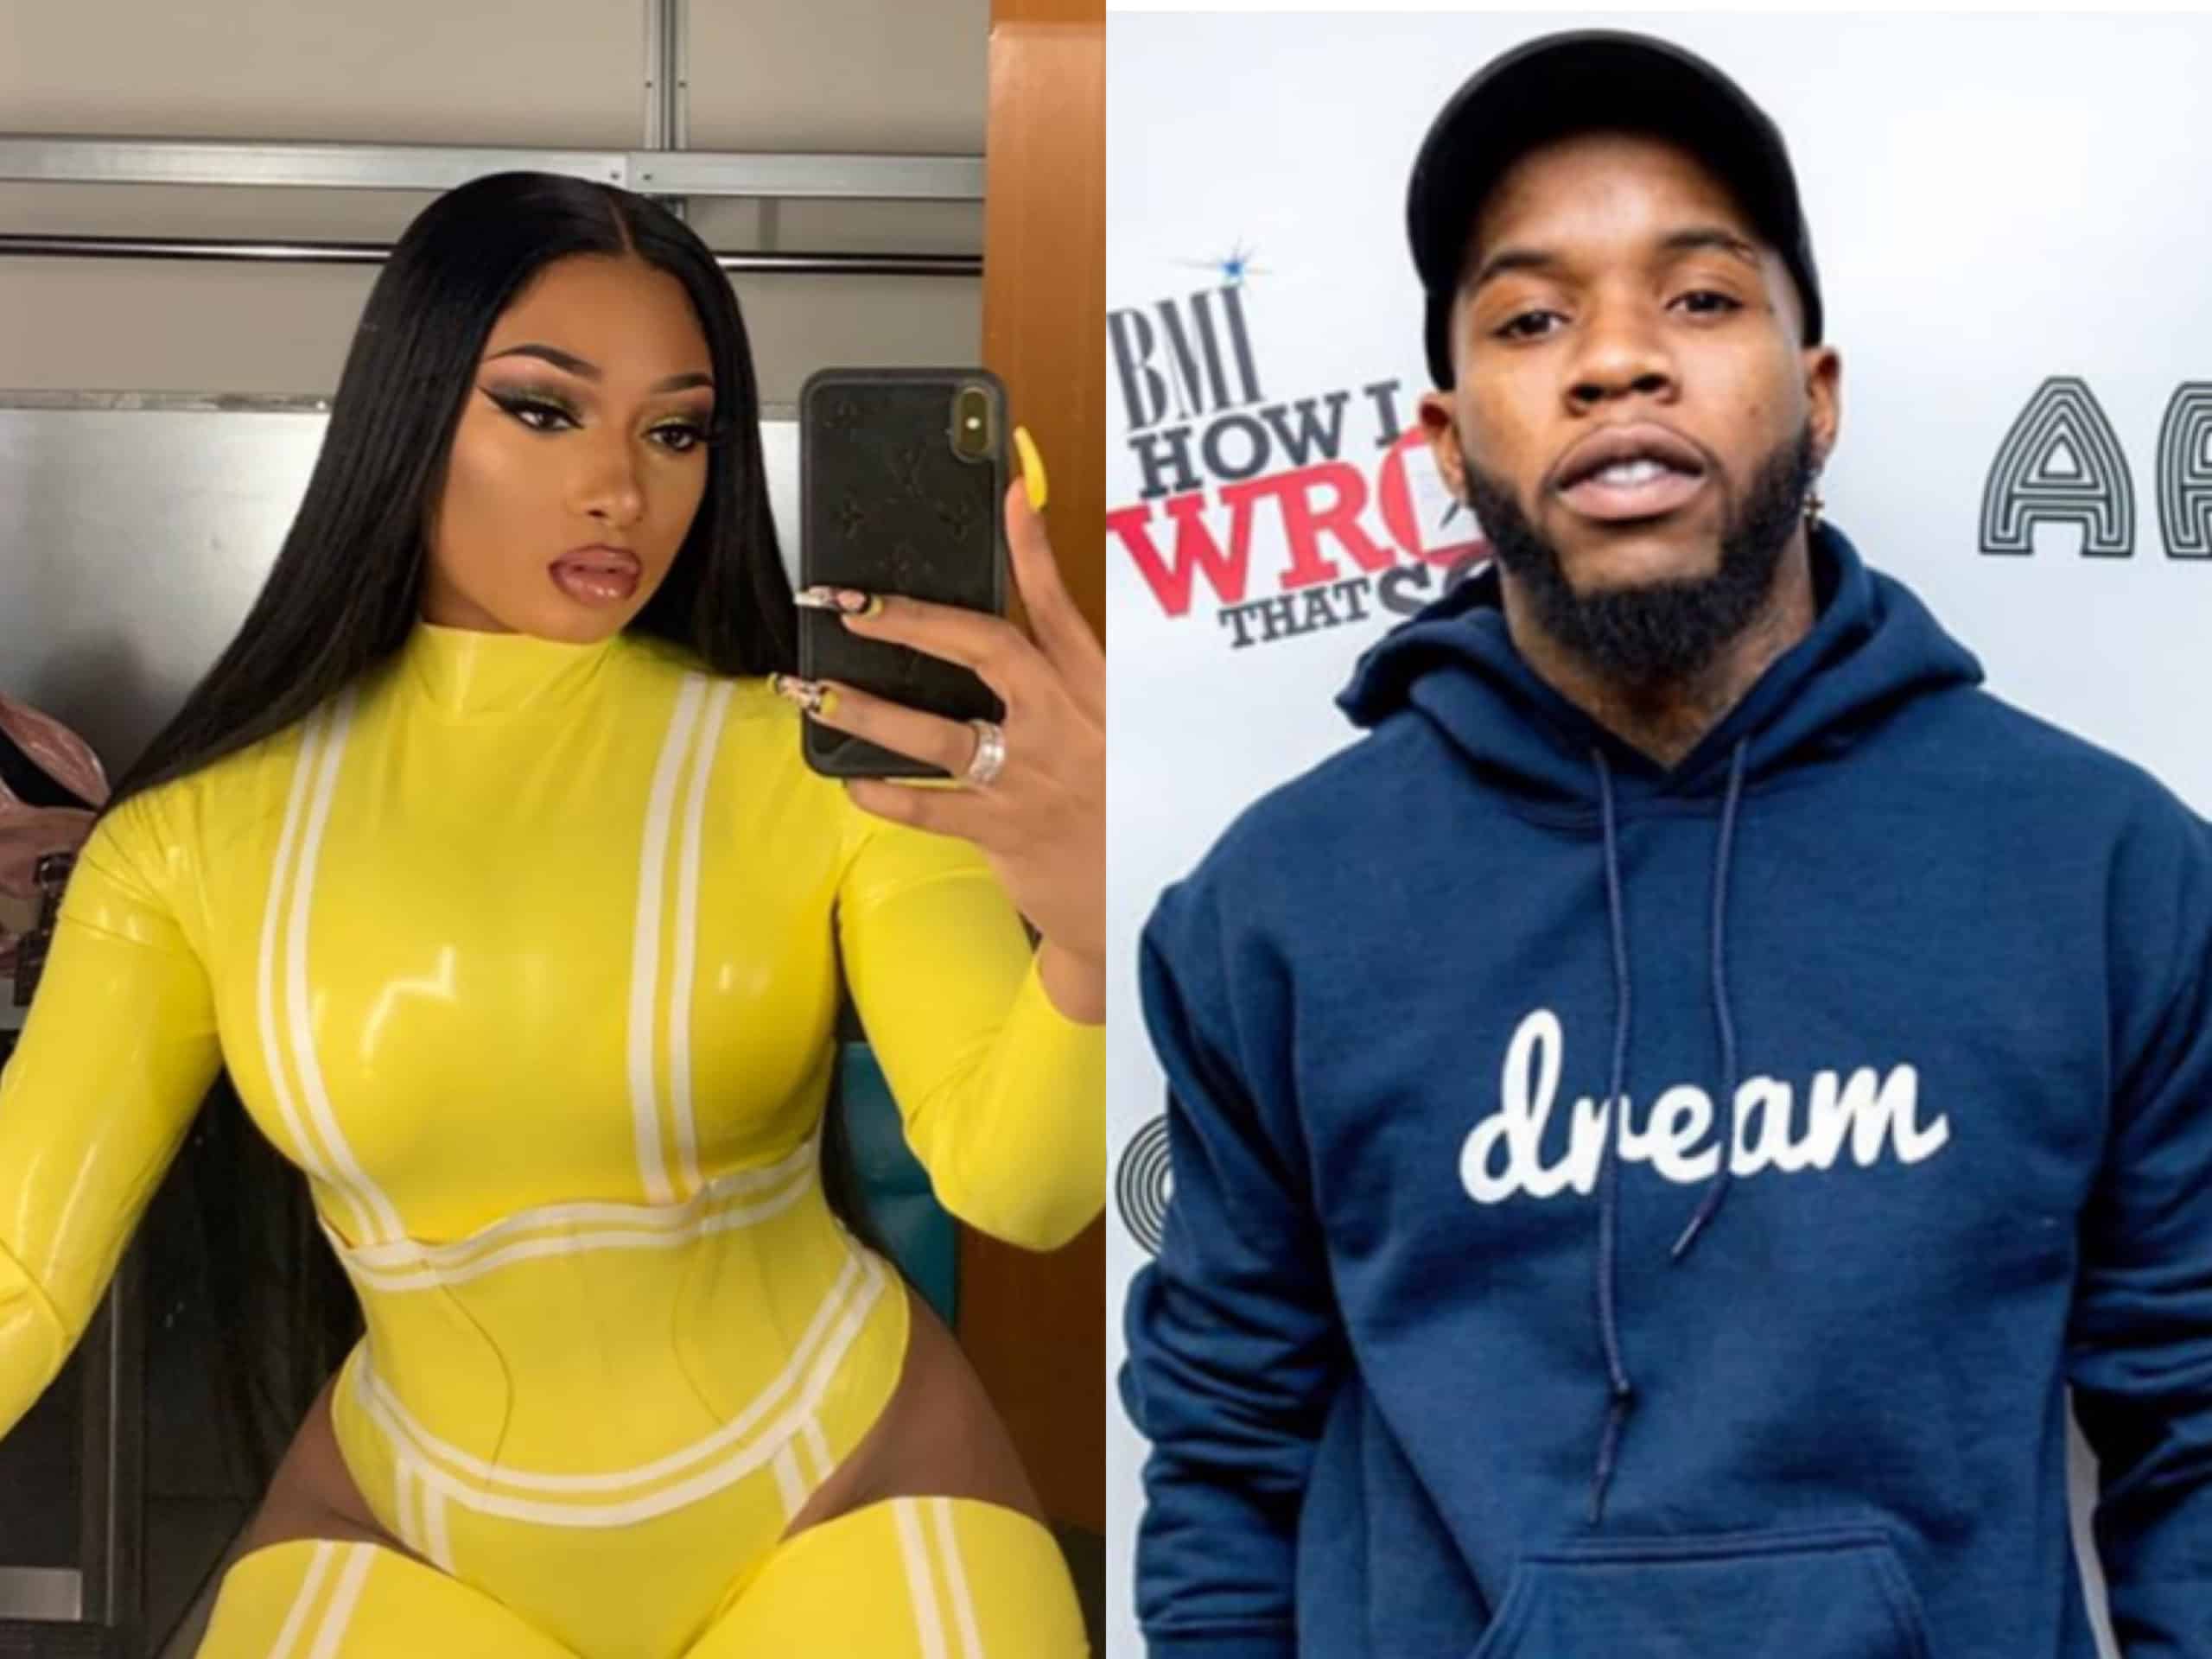 Tory Lanez’s Attorney Questions Protection Order Following Megan Thee Stallion’s GQ Interview: ‘It’s Extremely Hard For Him To Read These Things’ (Video+Exclusive Details)